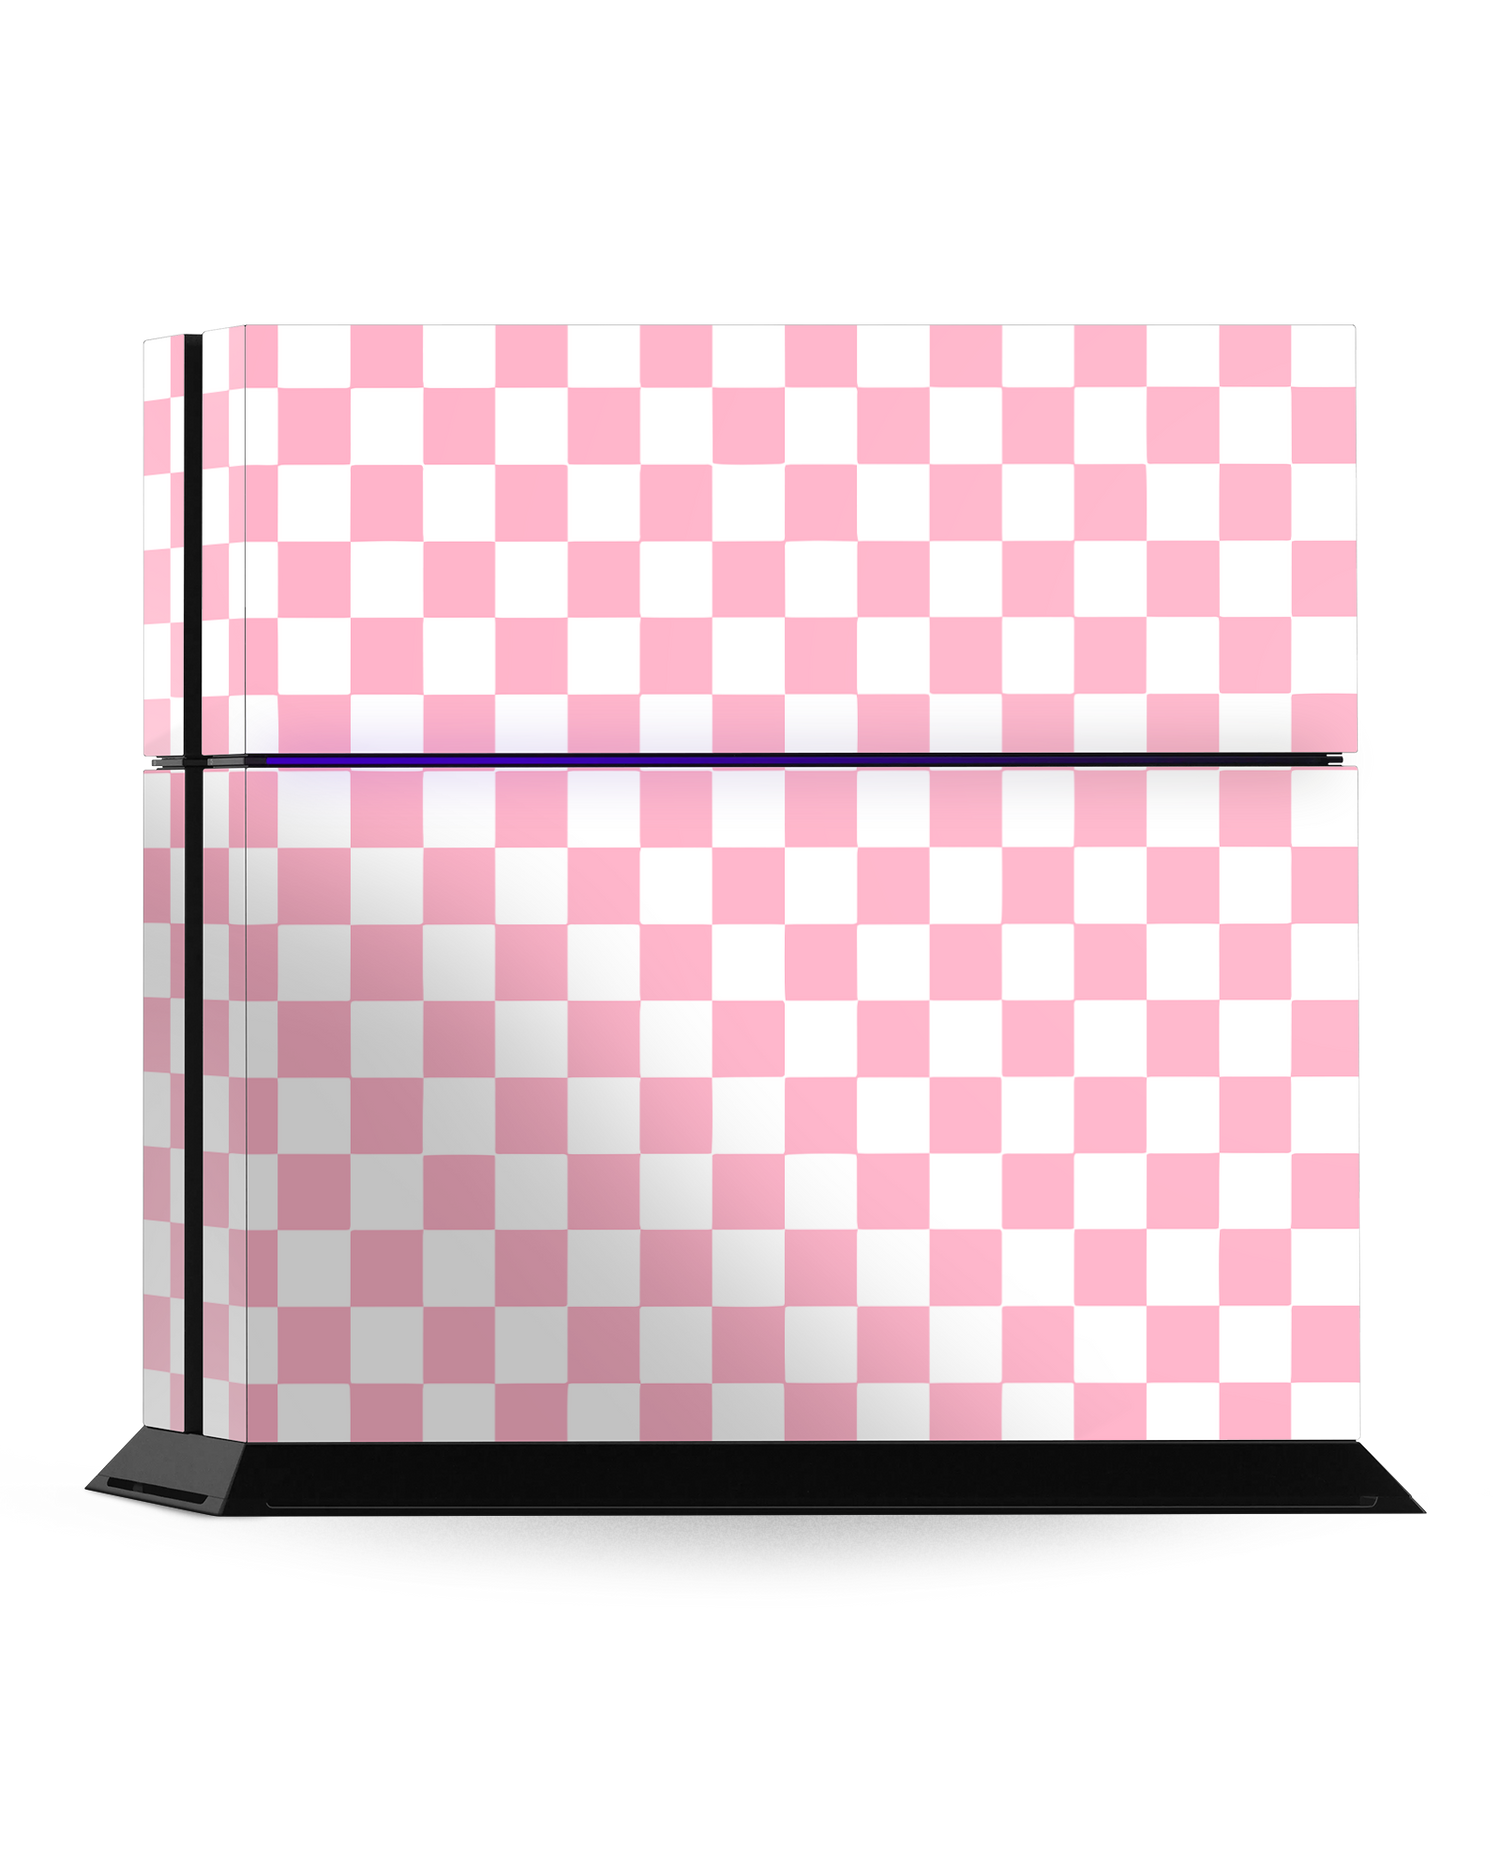 Pink Checkerboard Console Skin for Sony PlayStation 4: Standing